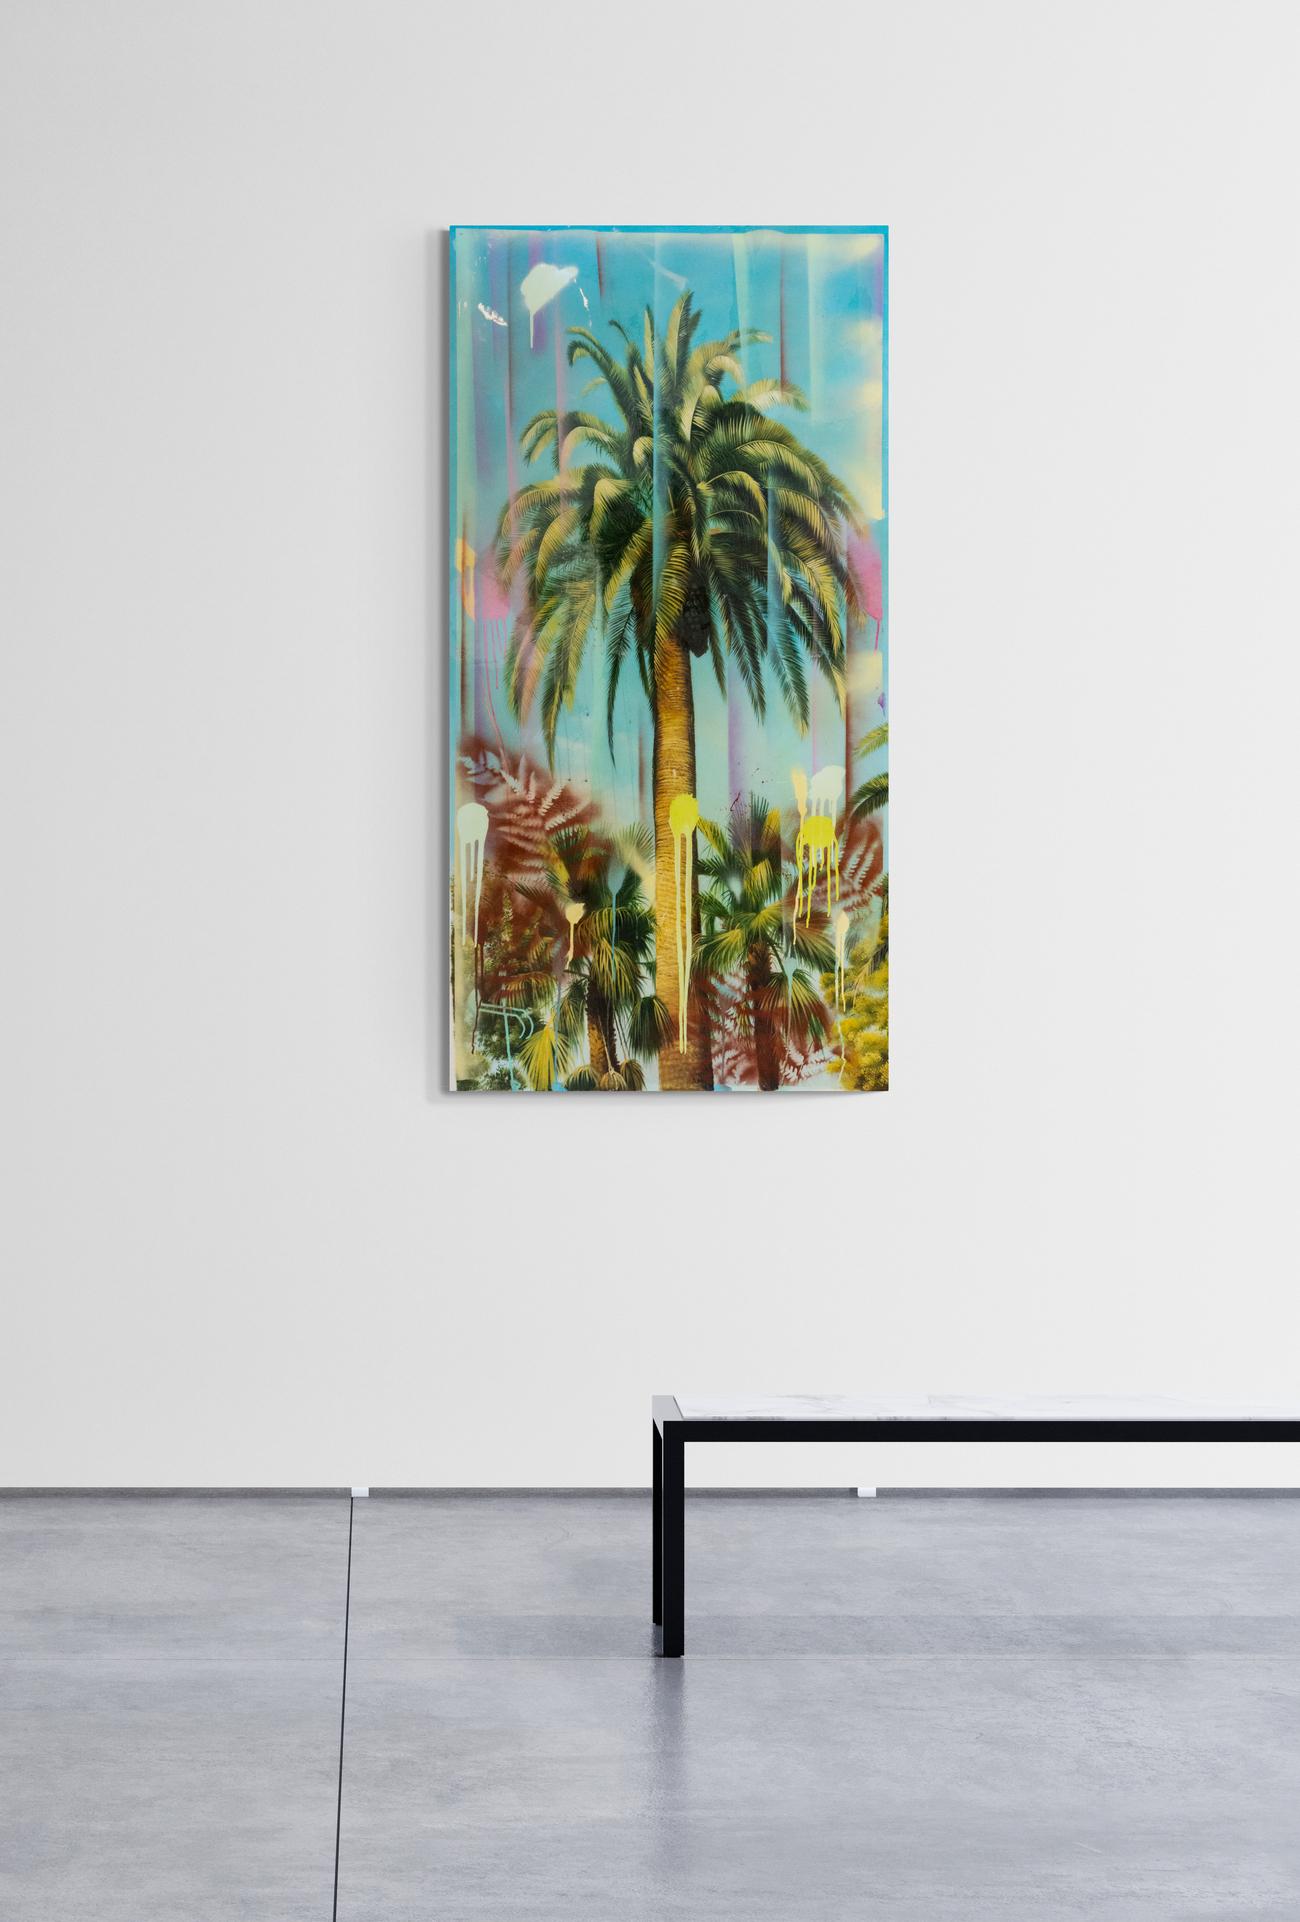 A majestic palm stands tall amidst a tangle of tropical plants in this landscape by Peter Hoffer. The Canadian artist is known for creating romantic paintings reminiscent of master landscape artists such as Britain’s John Constable. This tree